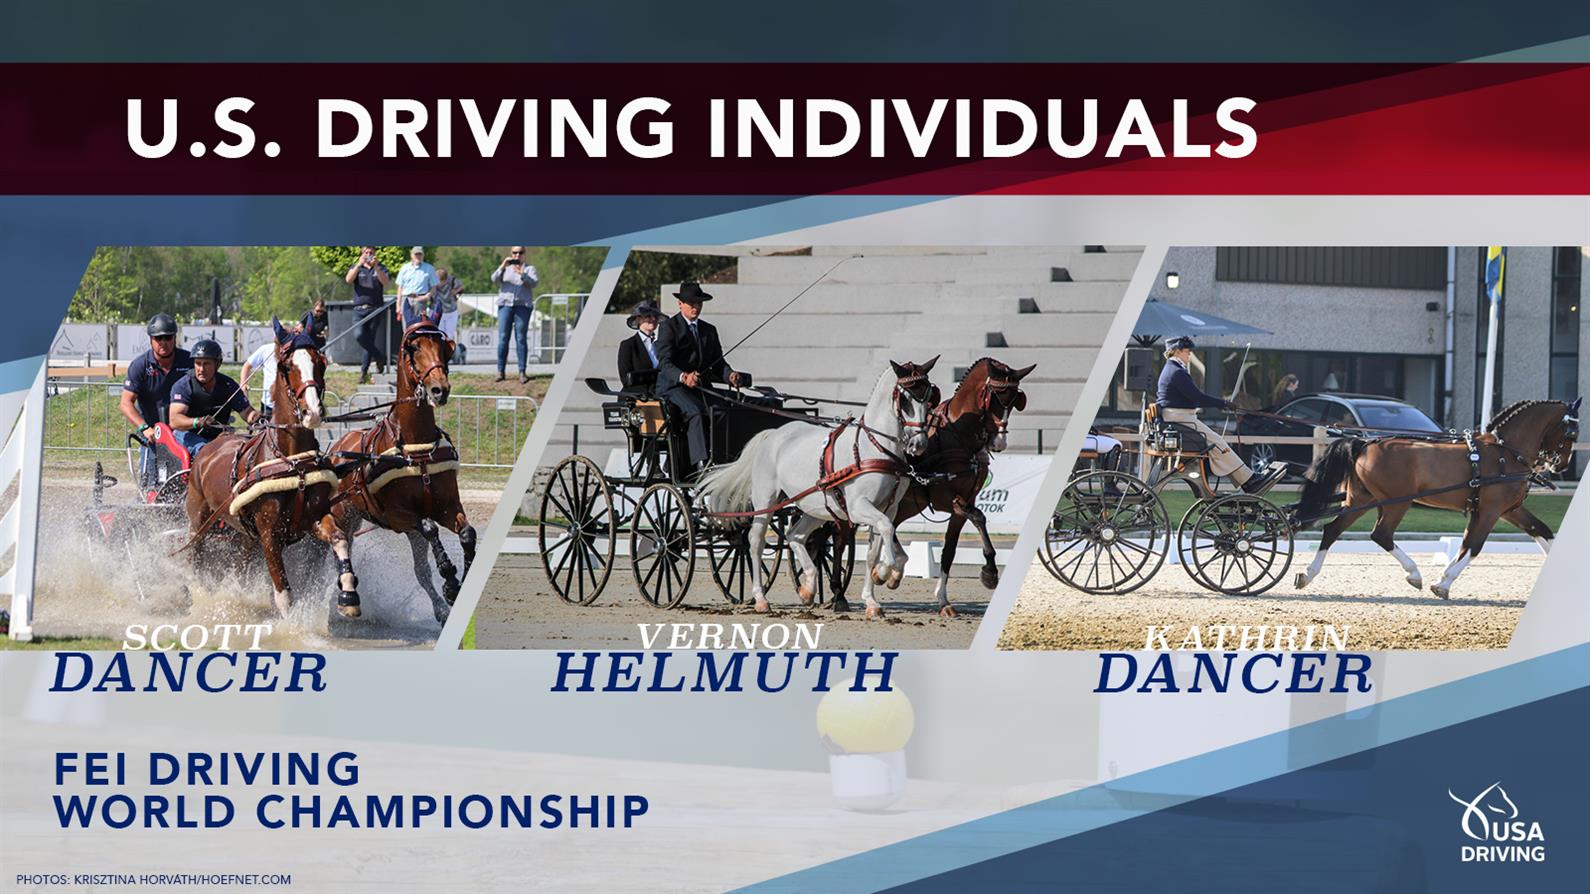 Individuals representing the U.S. at the 2021 FEI Driving World Championship for Pairs